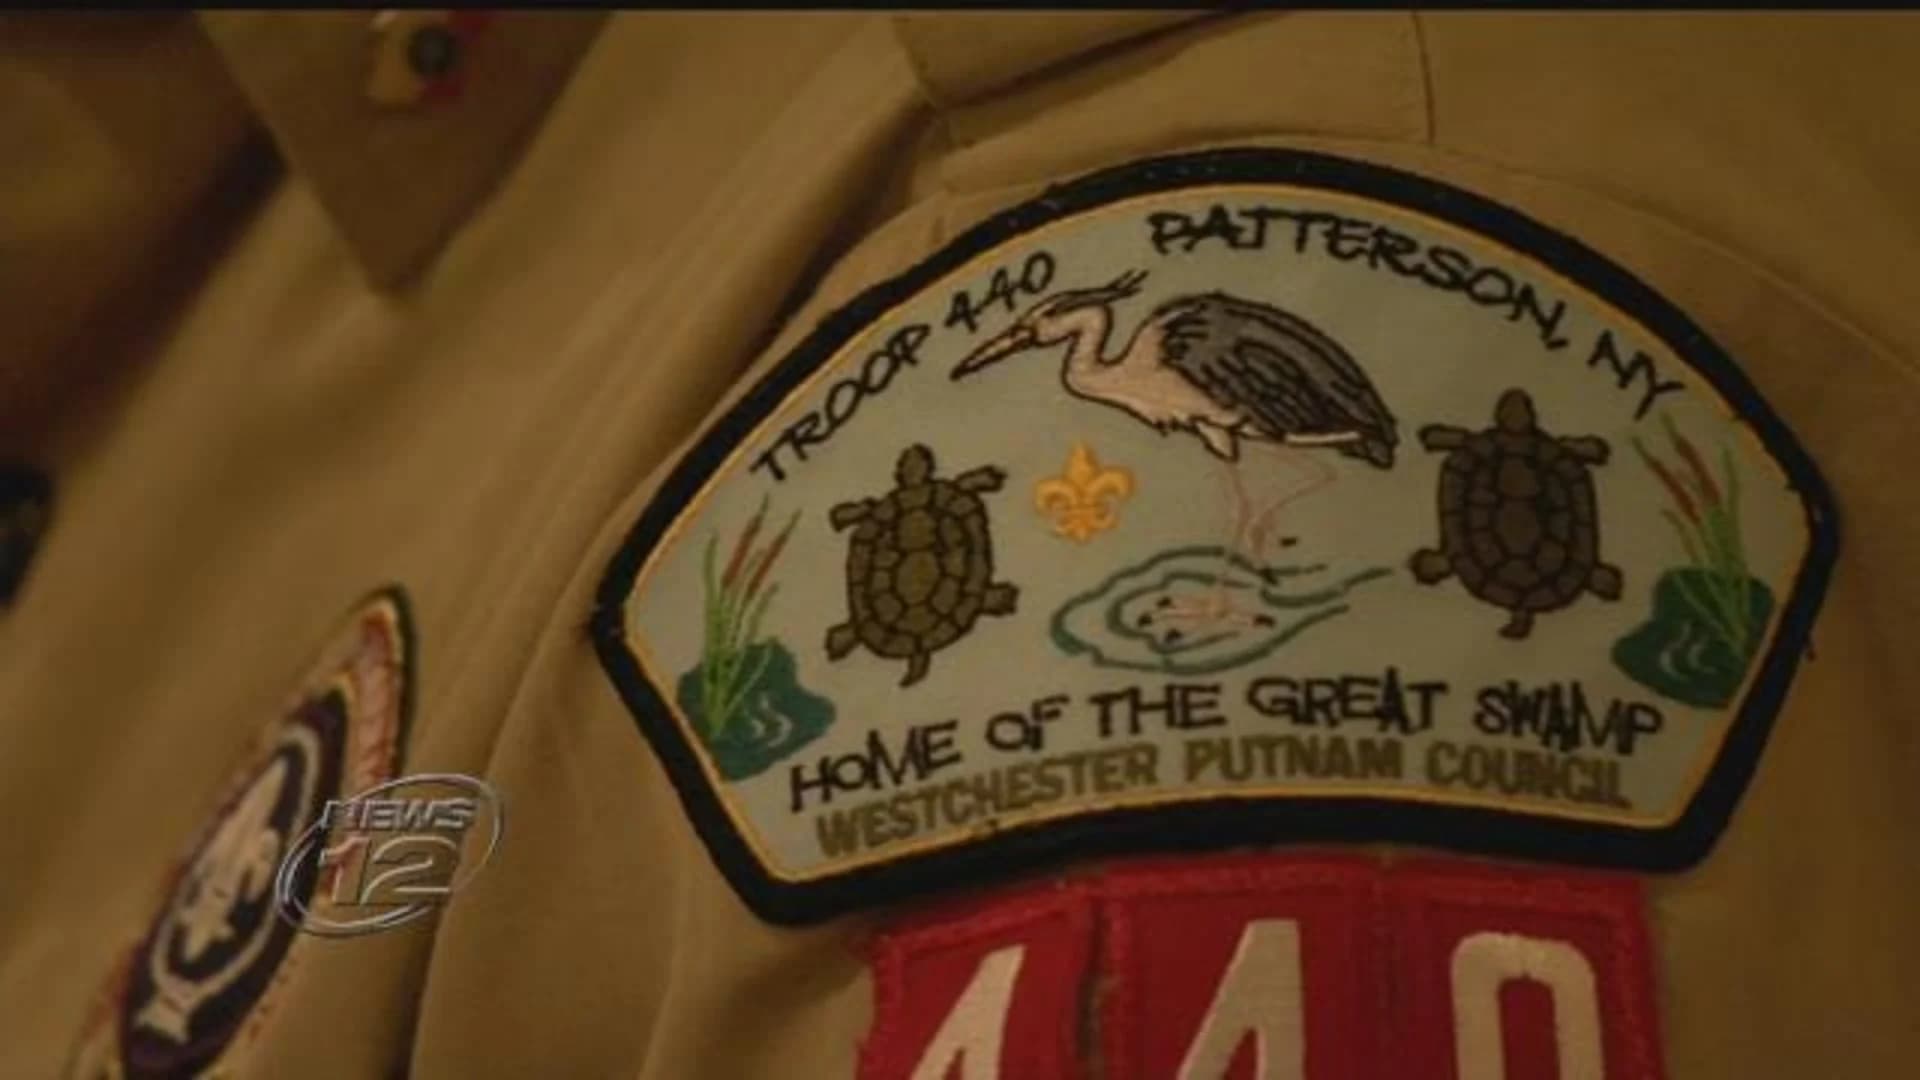 Calling all girls: Patterson Scout troop looks for recruits